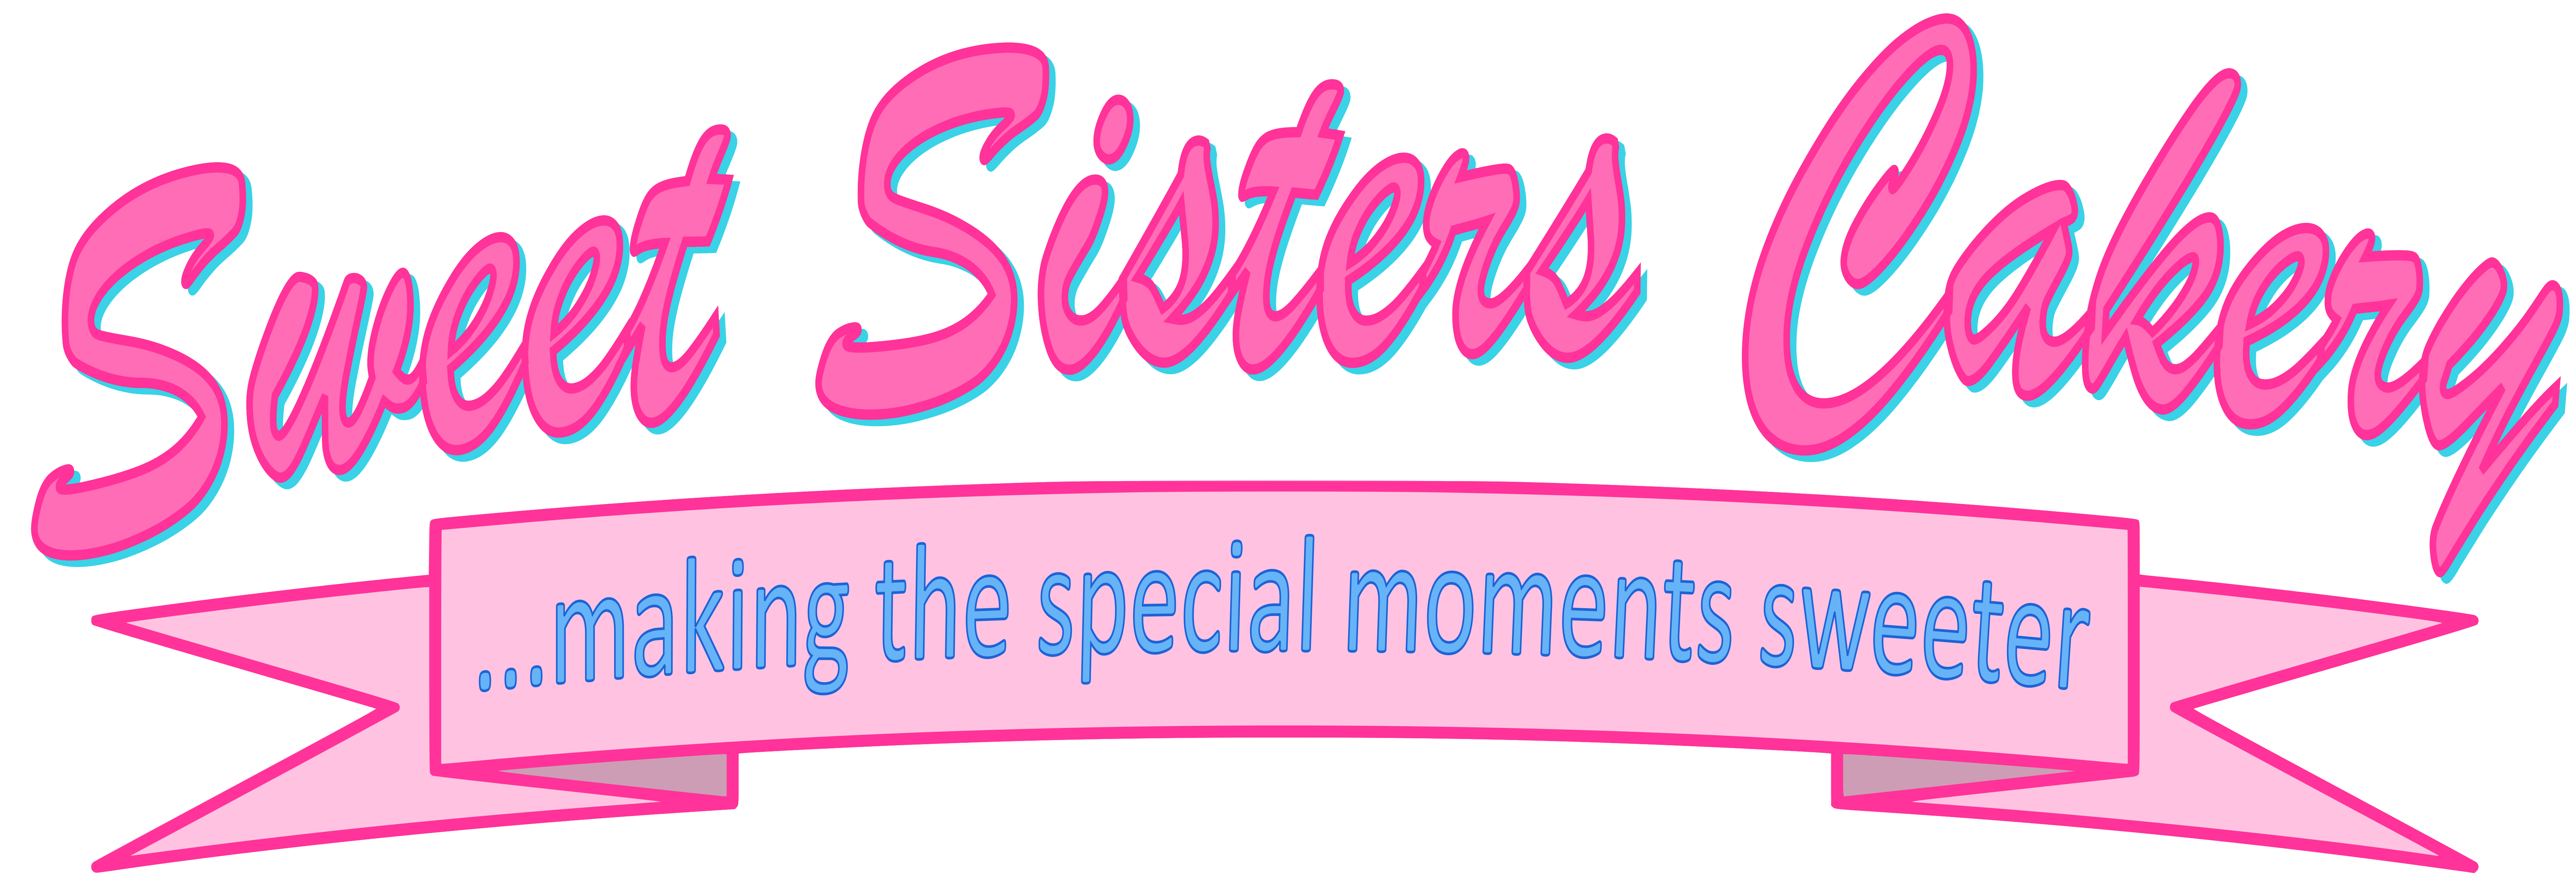 sweet sisters cakery logo making the special moments sweeter